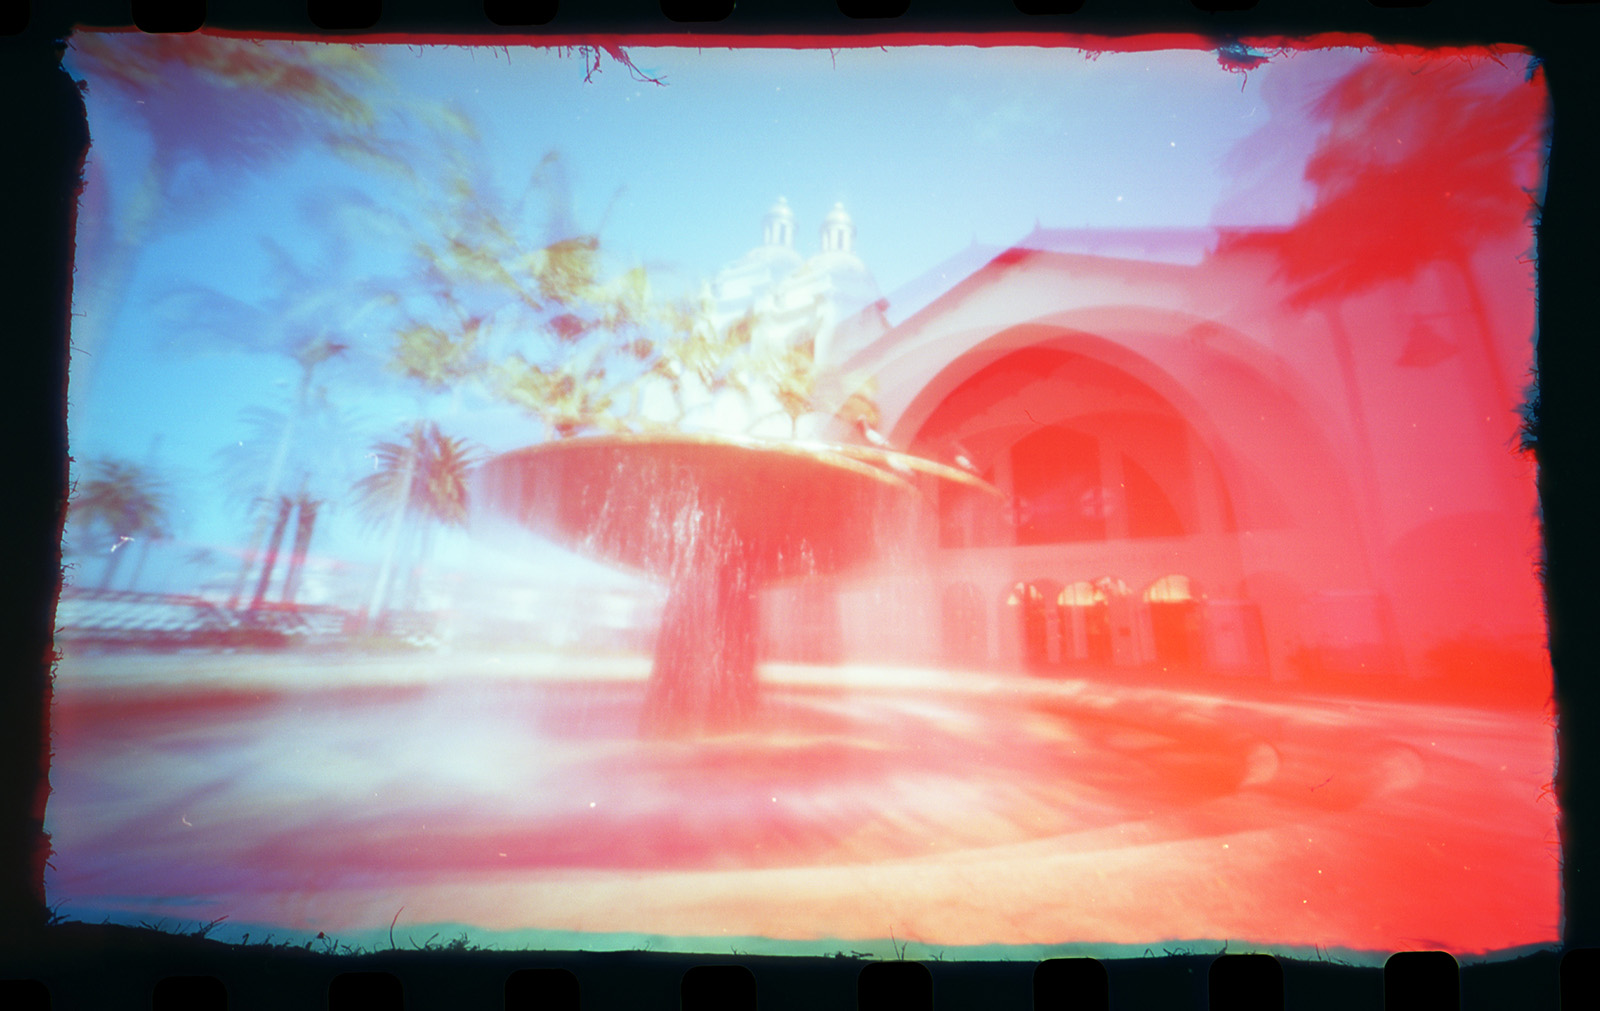 Color 35mm film photograph created with a homemade matchbox pinhole camera of the train depot in downtown San Diego California